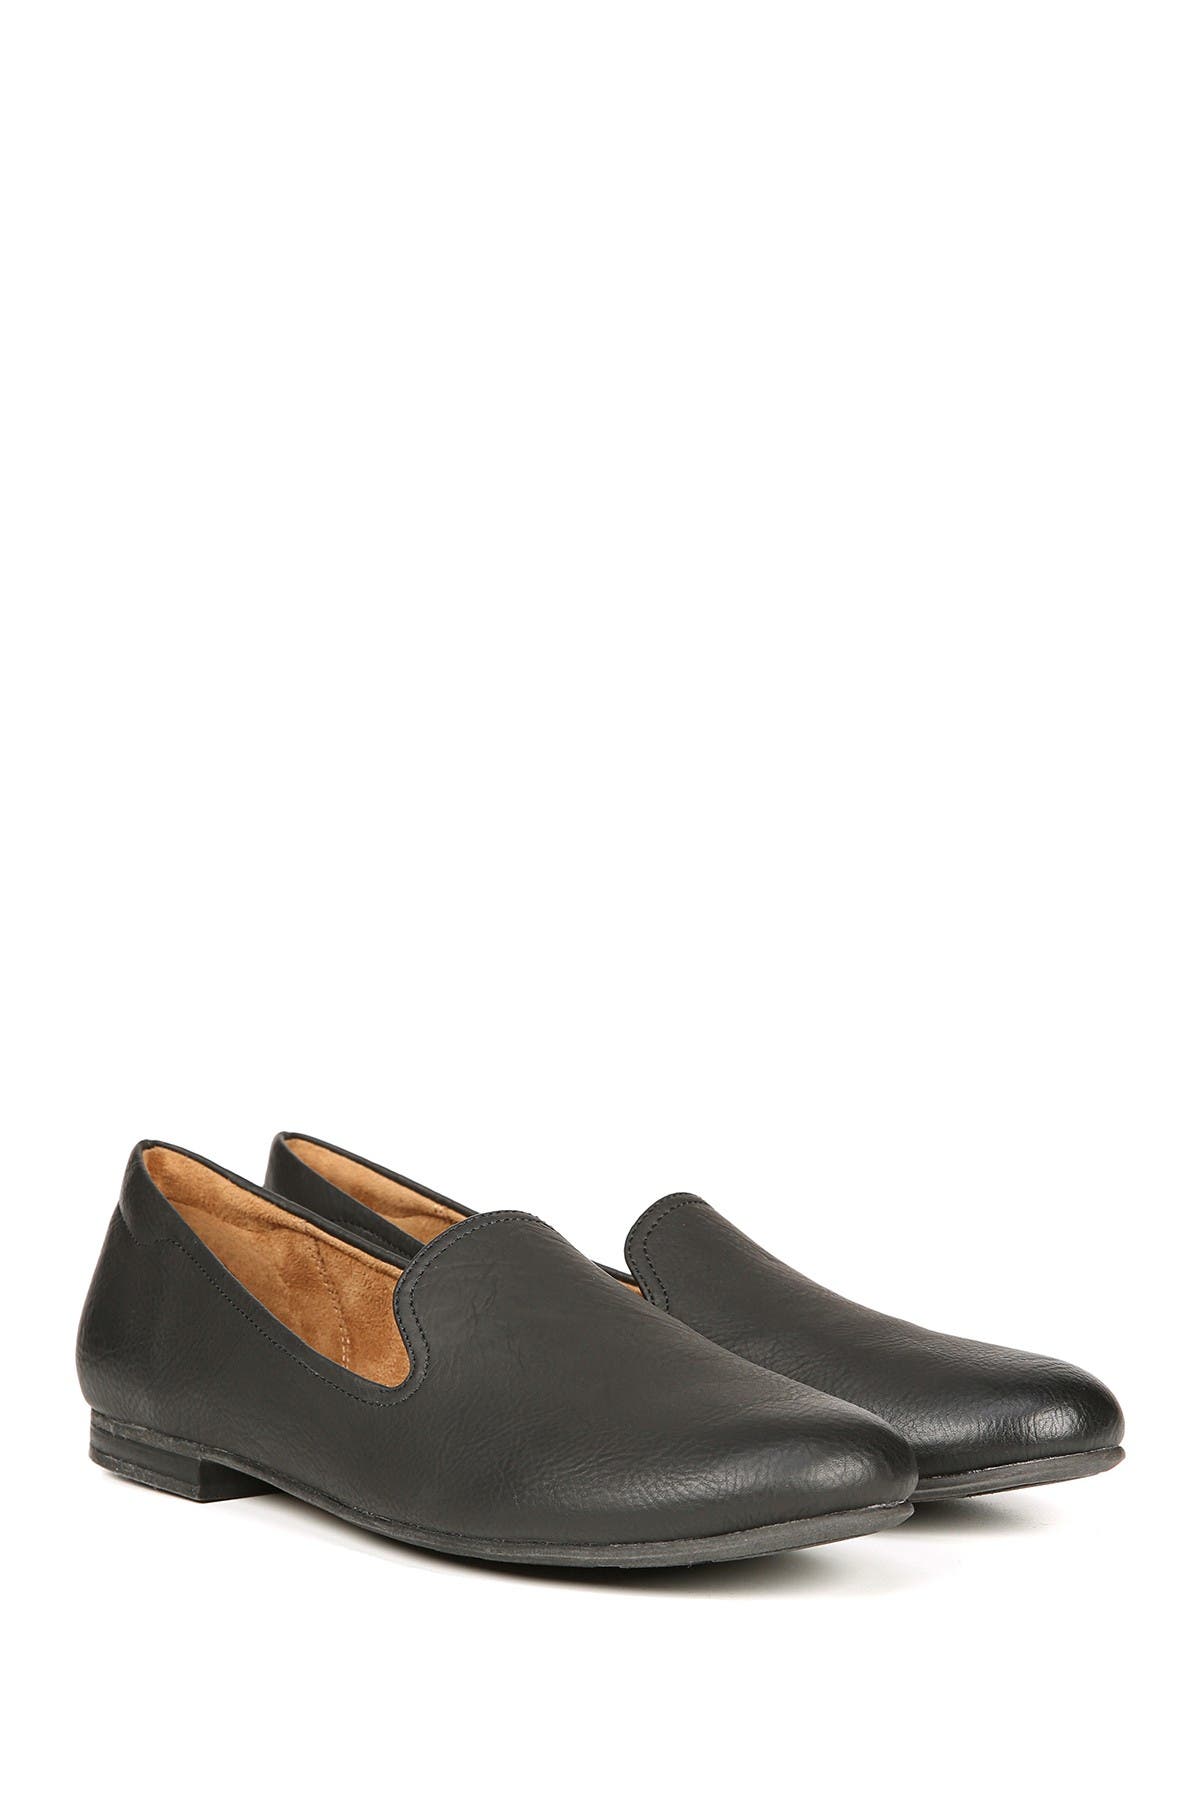 soul naturalizer alexis women's loafers